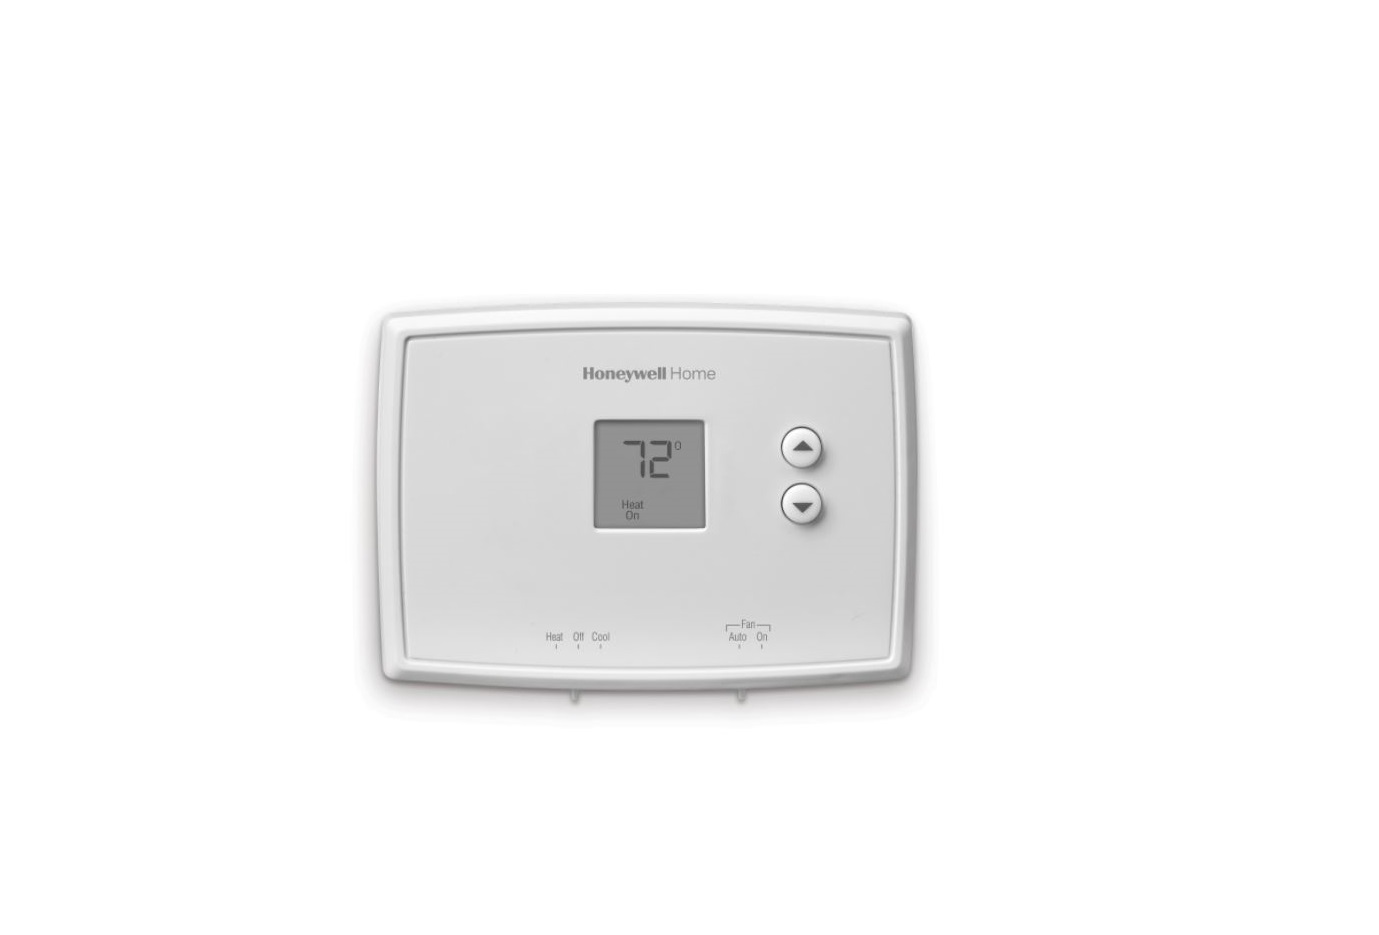 Honeywell Home RTH111 Series Non-Programmable Thermostat Owner’s Manual